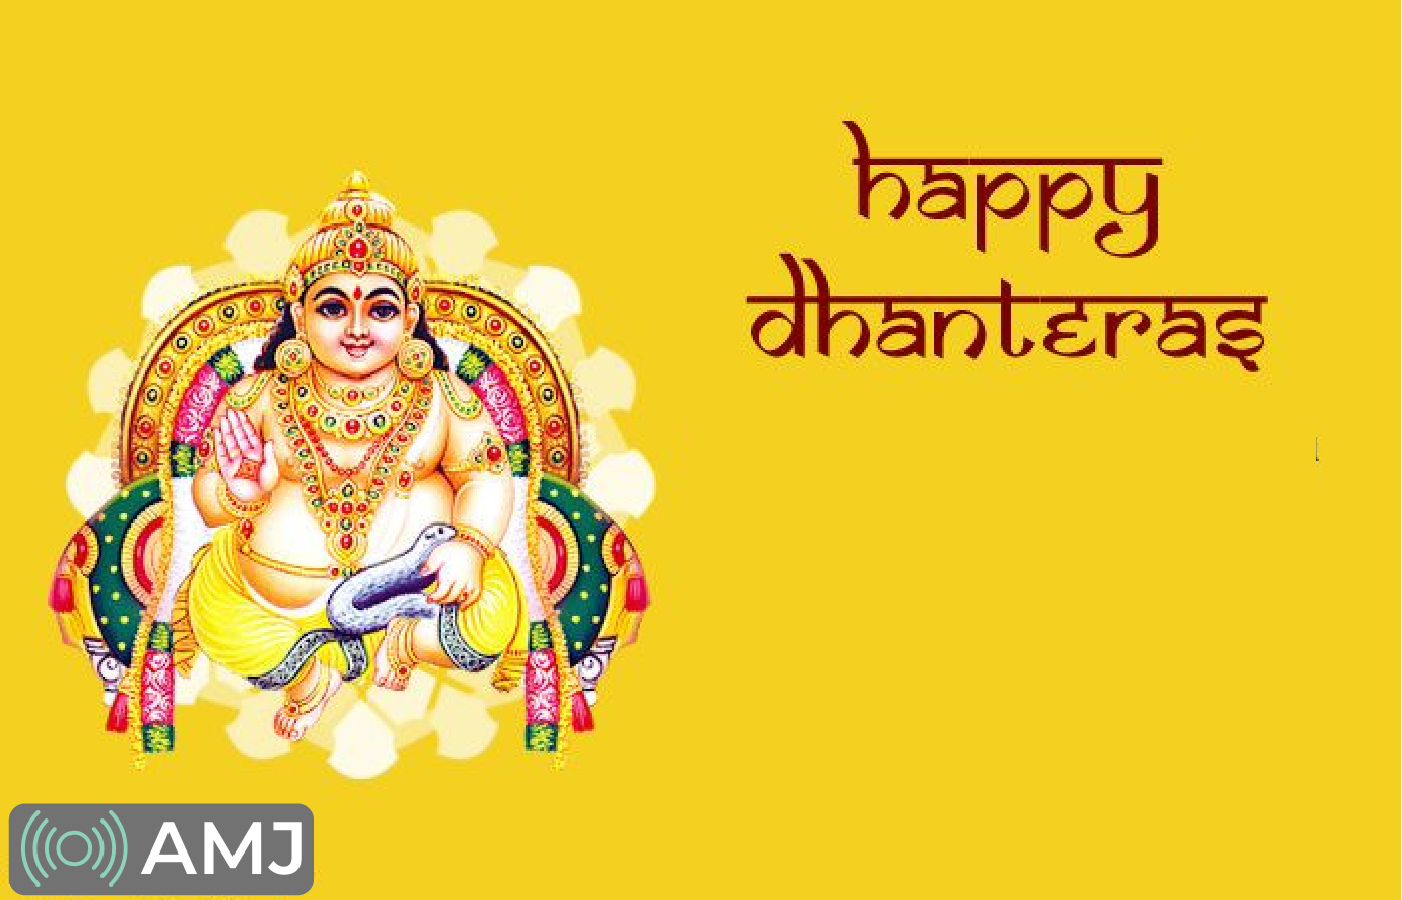 Dhanteras Images for Whatsapp